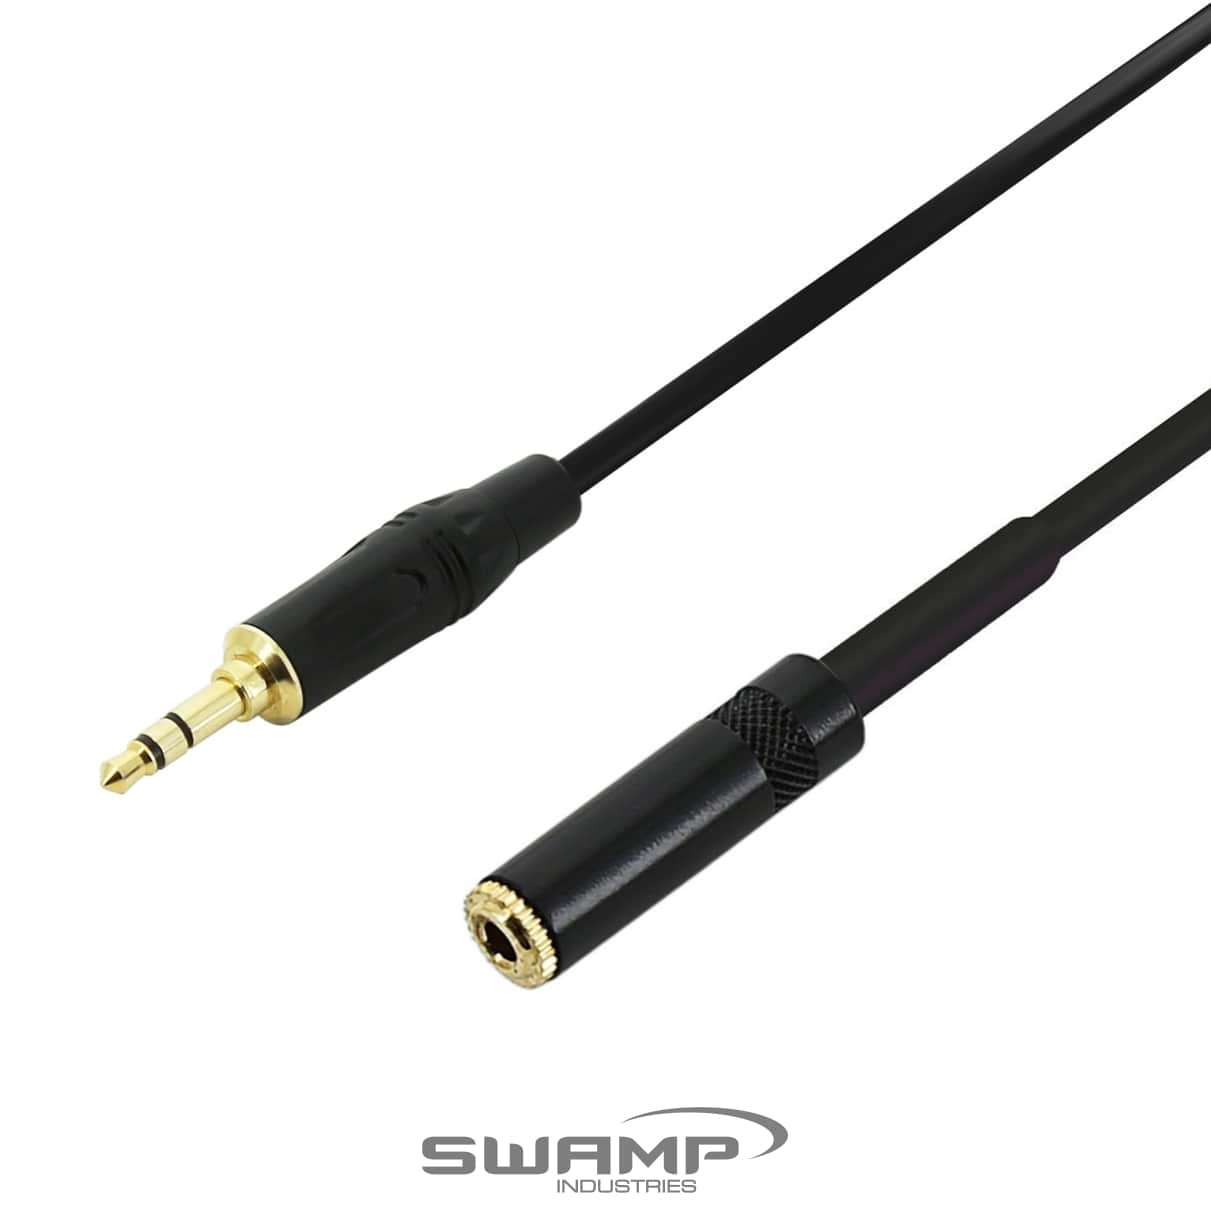 SWAMP Smartphone to Dual RCA Cable - Extended 3.5mm Mini-Jack suits Phone Cases